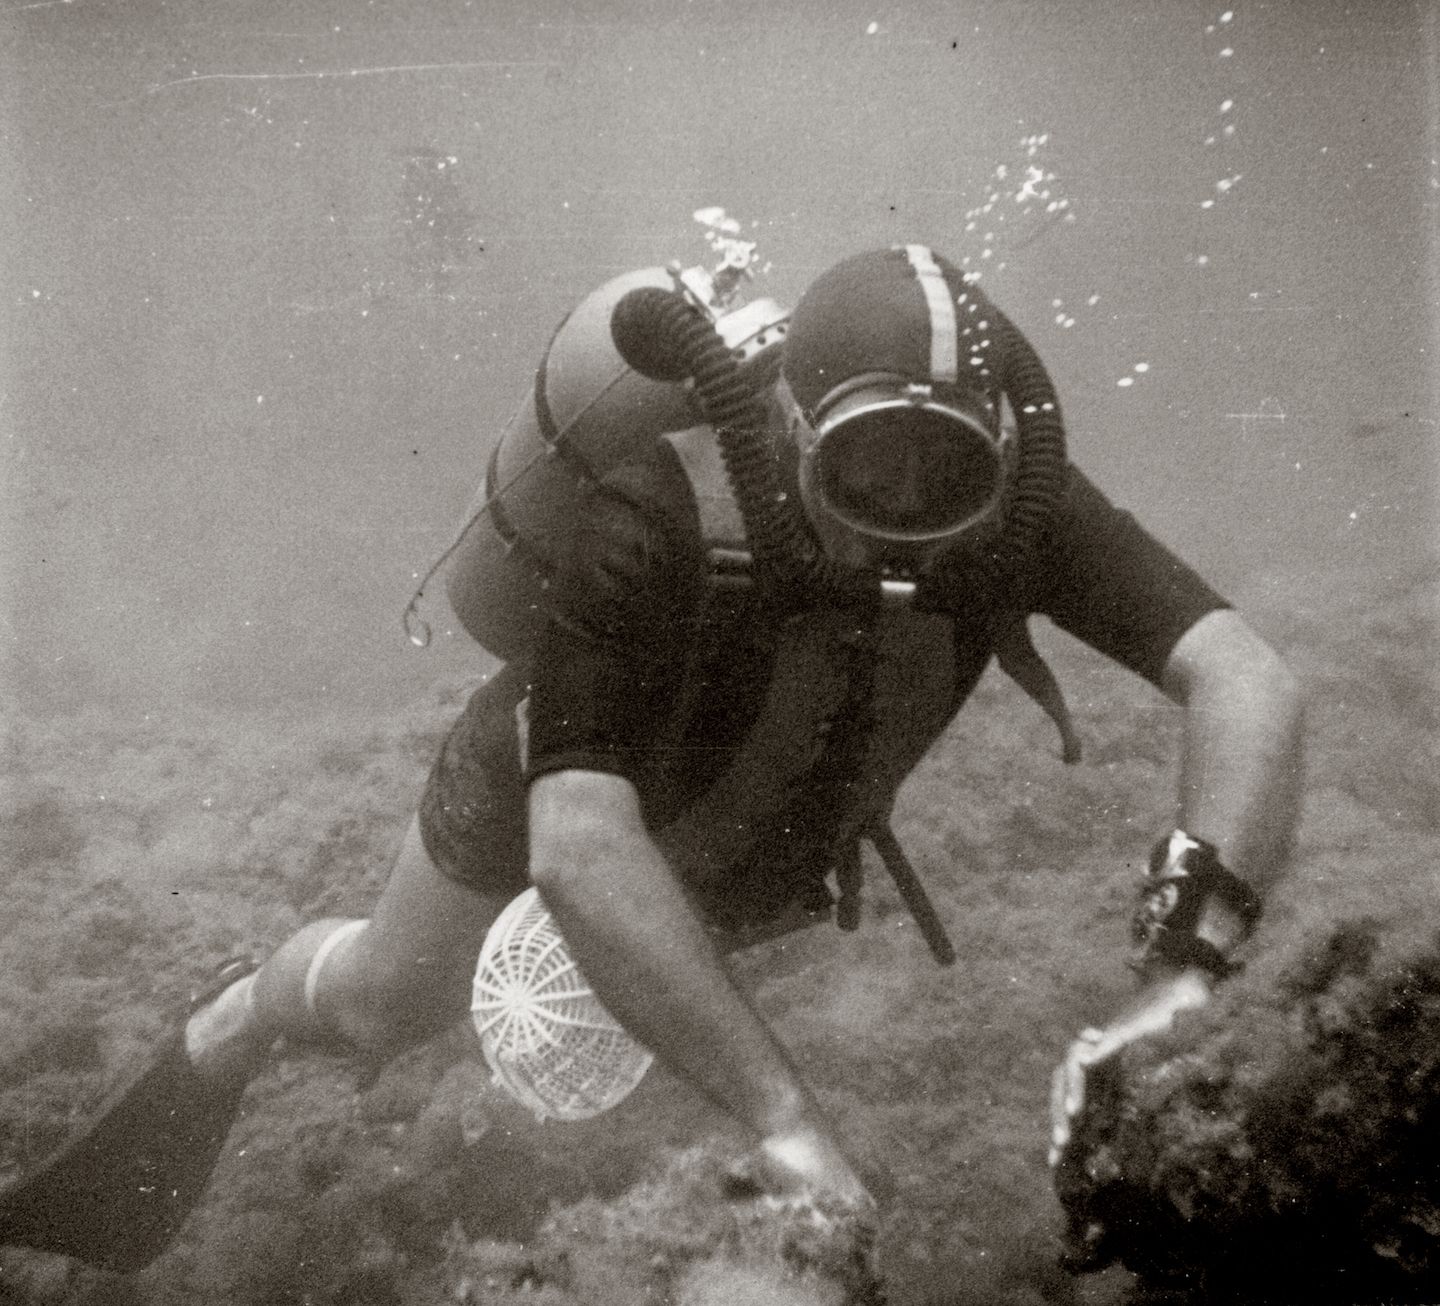 Jean-Jacques Fiechter diving in the South of France